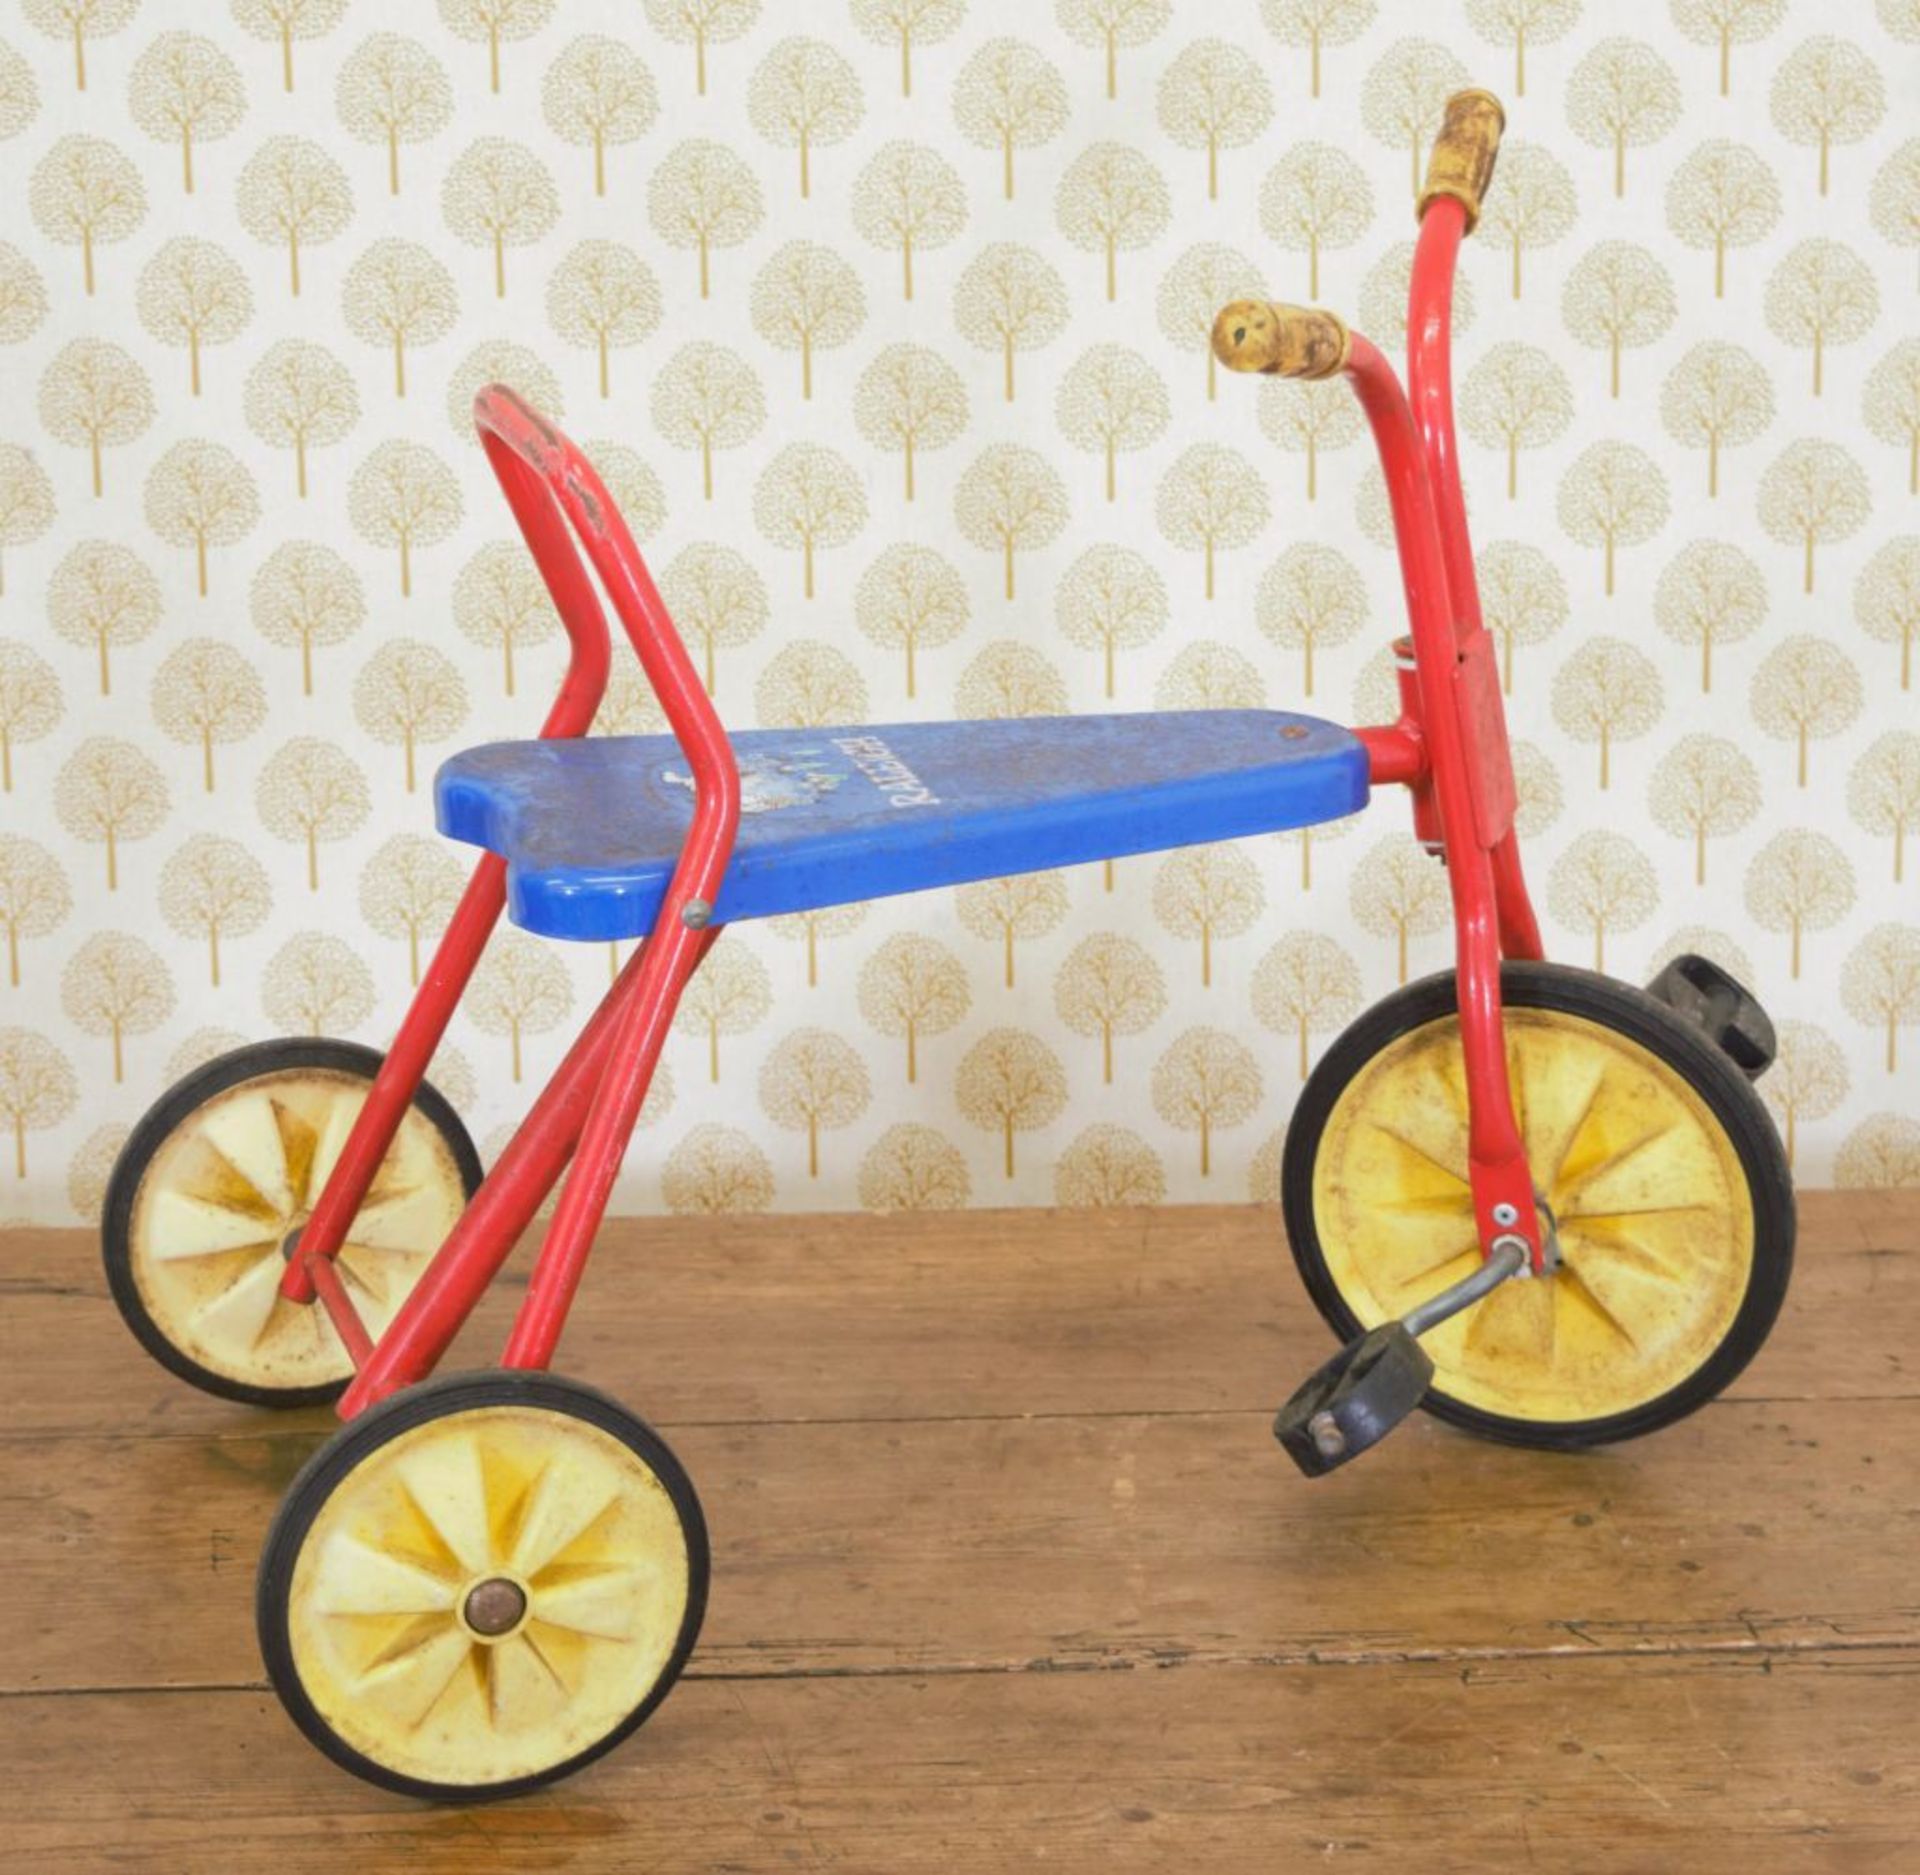 VINTAGE 3-WHEEL CHILD'S TRICYCLE - Image 2 of 2